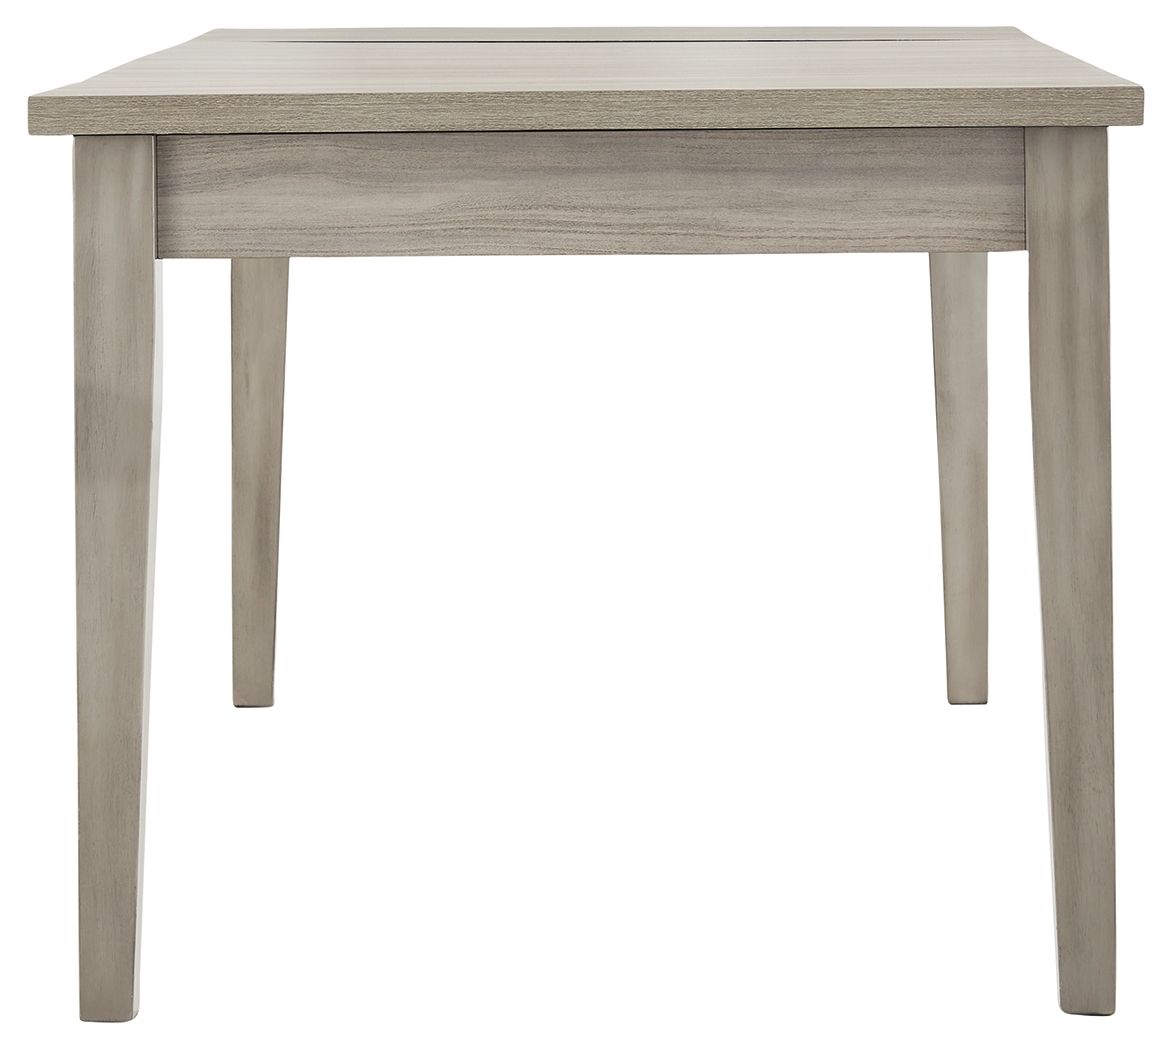 Parellen - Gray - Rectangular Dining Room Table With Storage